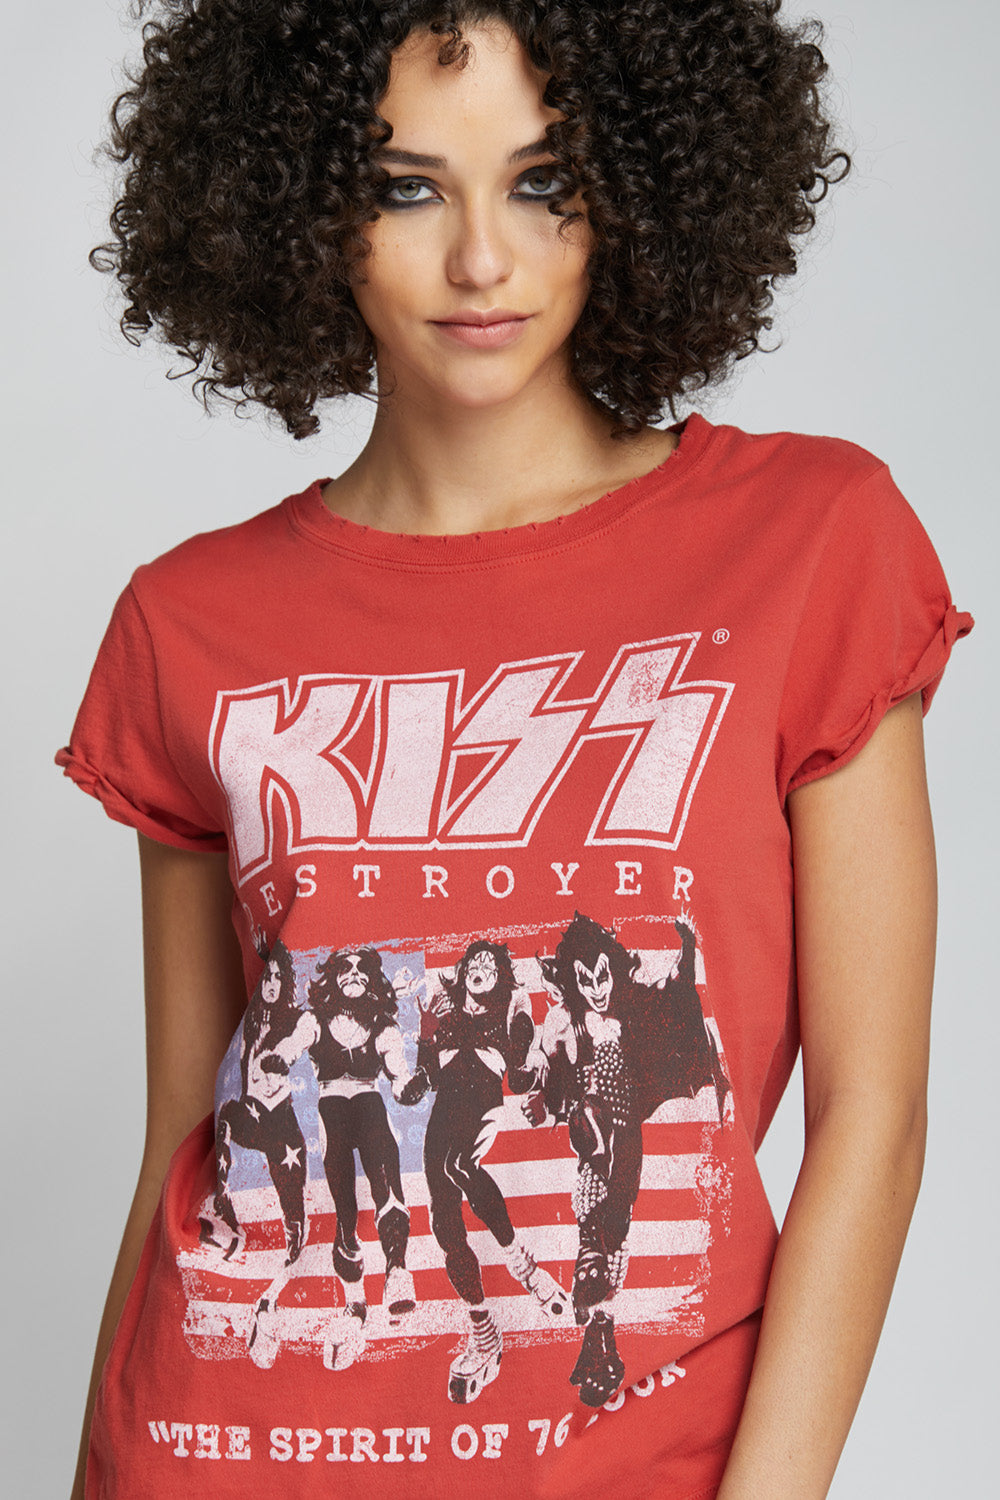 KISS Destroyer Tour Tee by Recycled Karma Brands